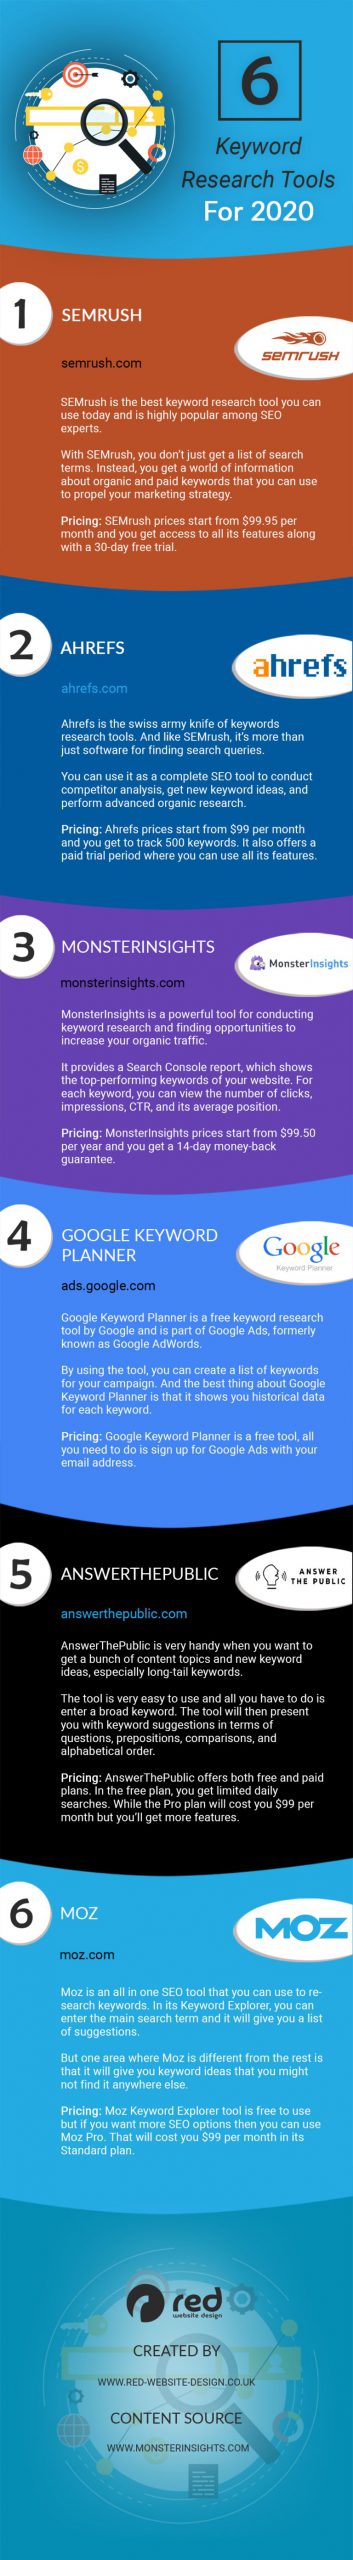 6 keyword research tools to improve your seo in 2020 and beyond infographic scaled 1